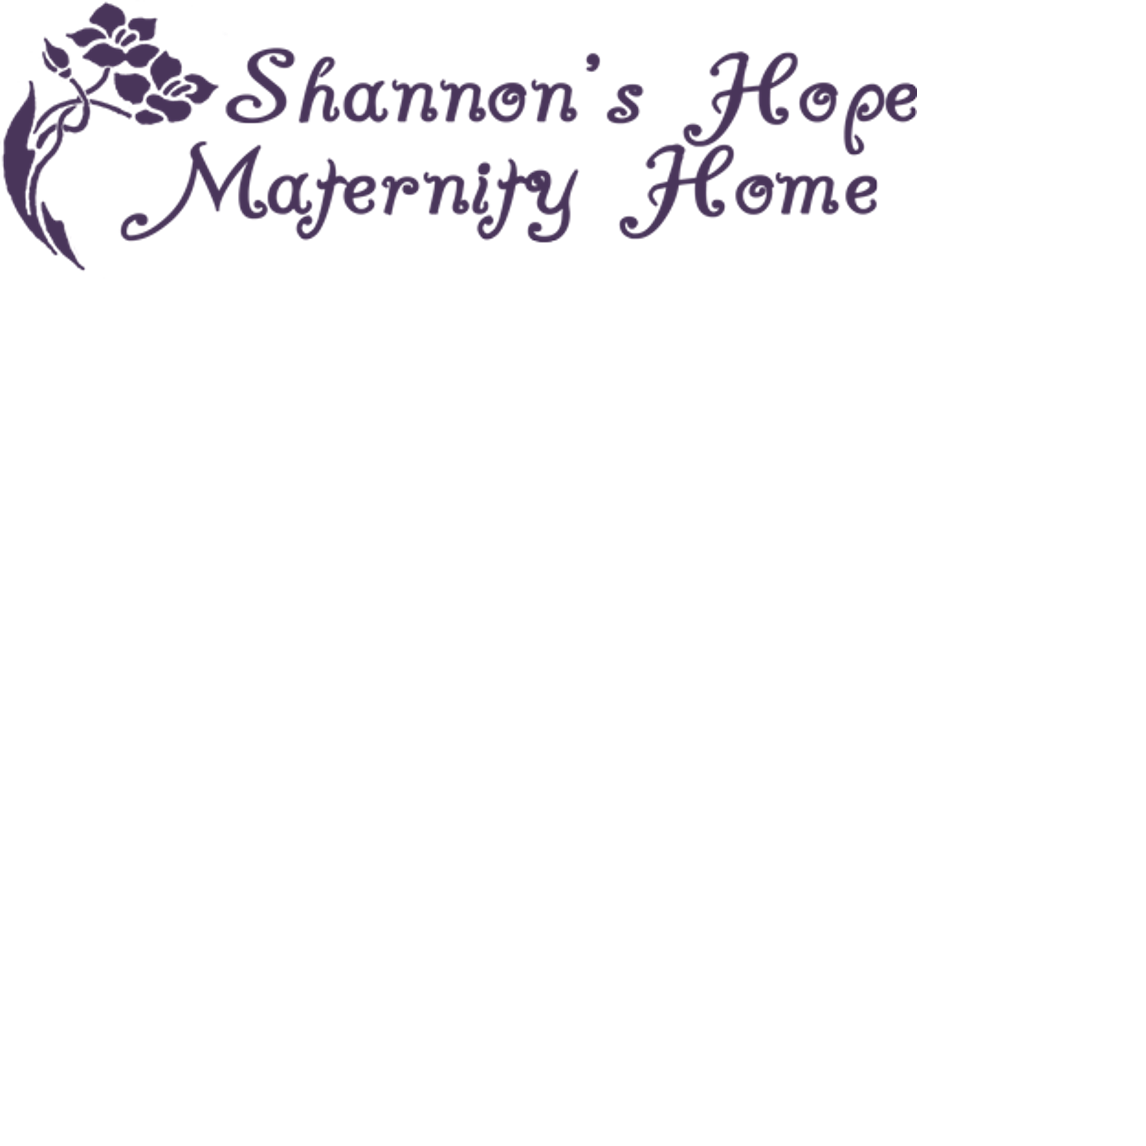 Shannon's Hope Maternity Home